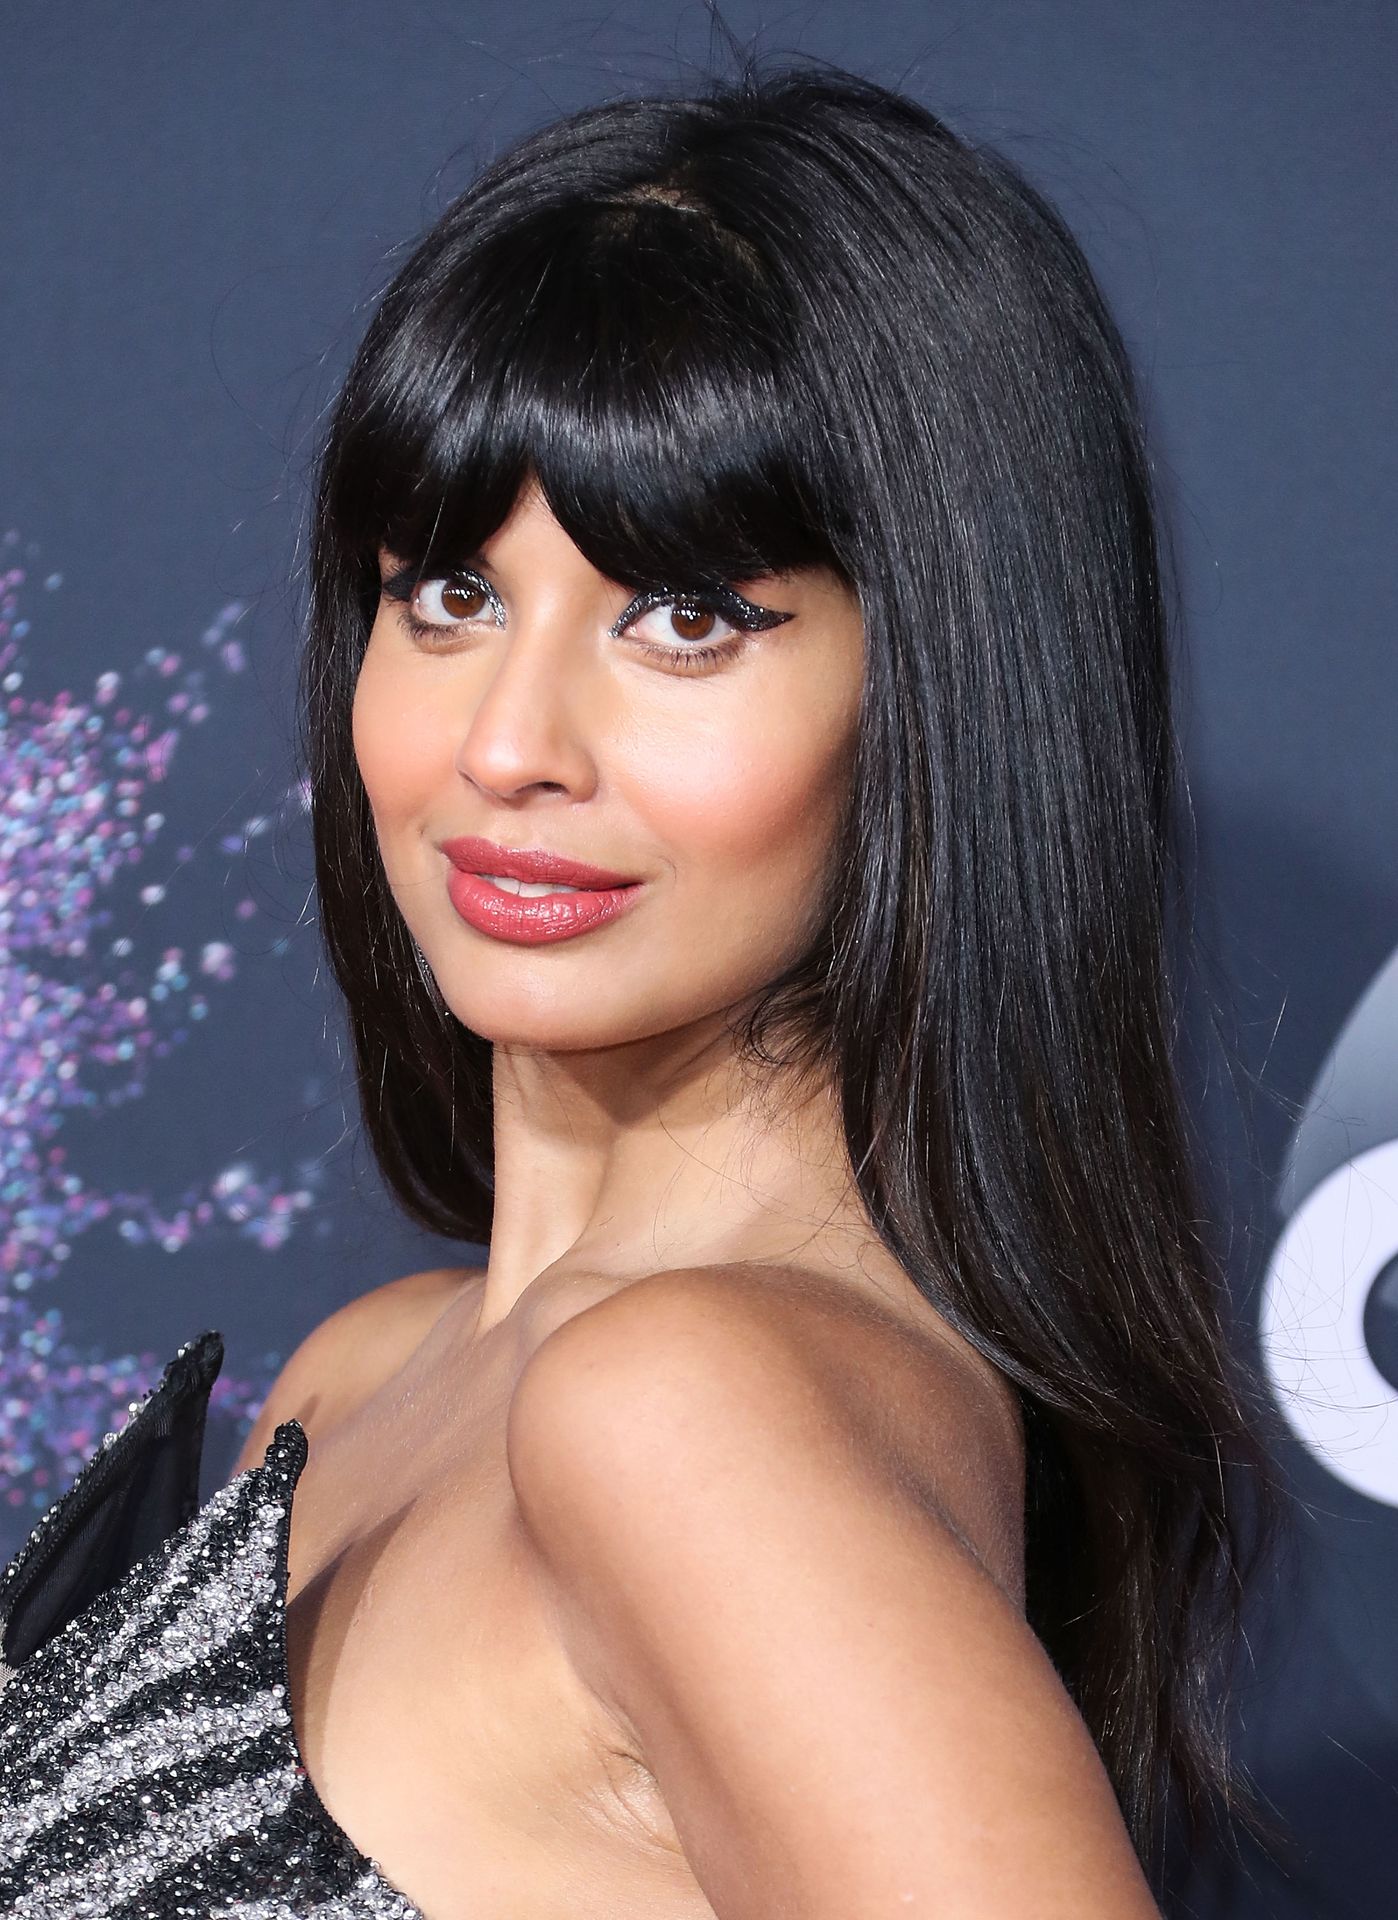 Shy Looking Cutie Jameela Jamil Shows Her Stunning Cleavage The.